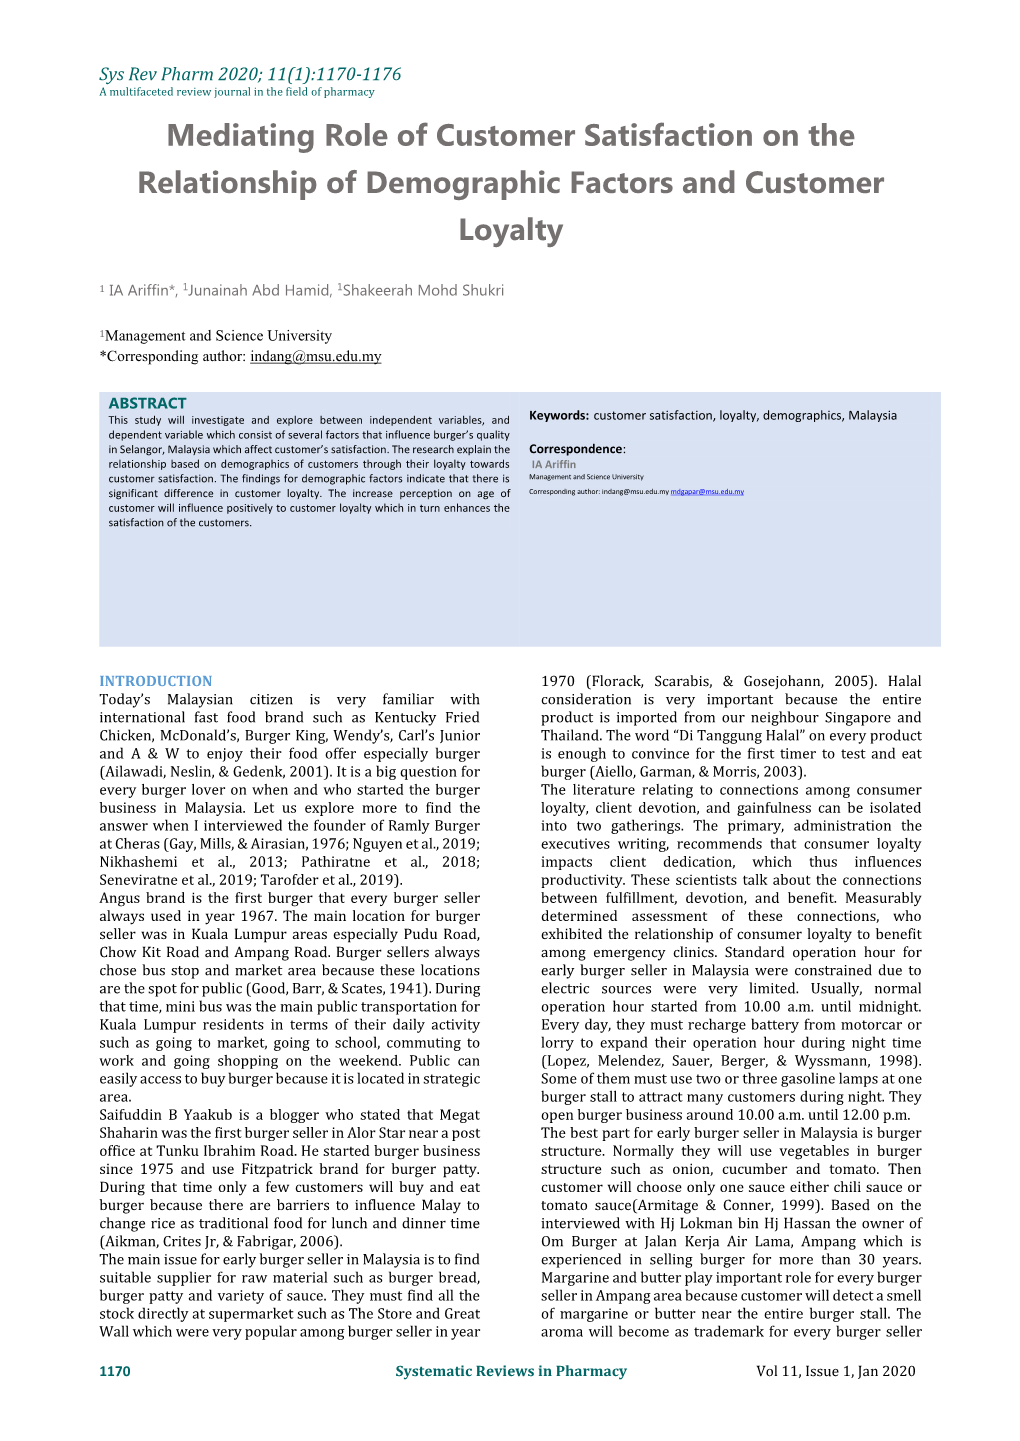 Mediating Role of Customer Satisfaction on the Relationship of Demographic Factors and Customer Loyalty